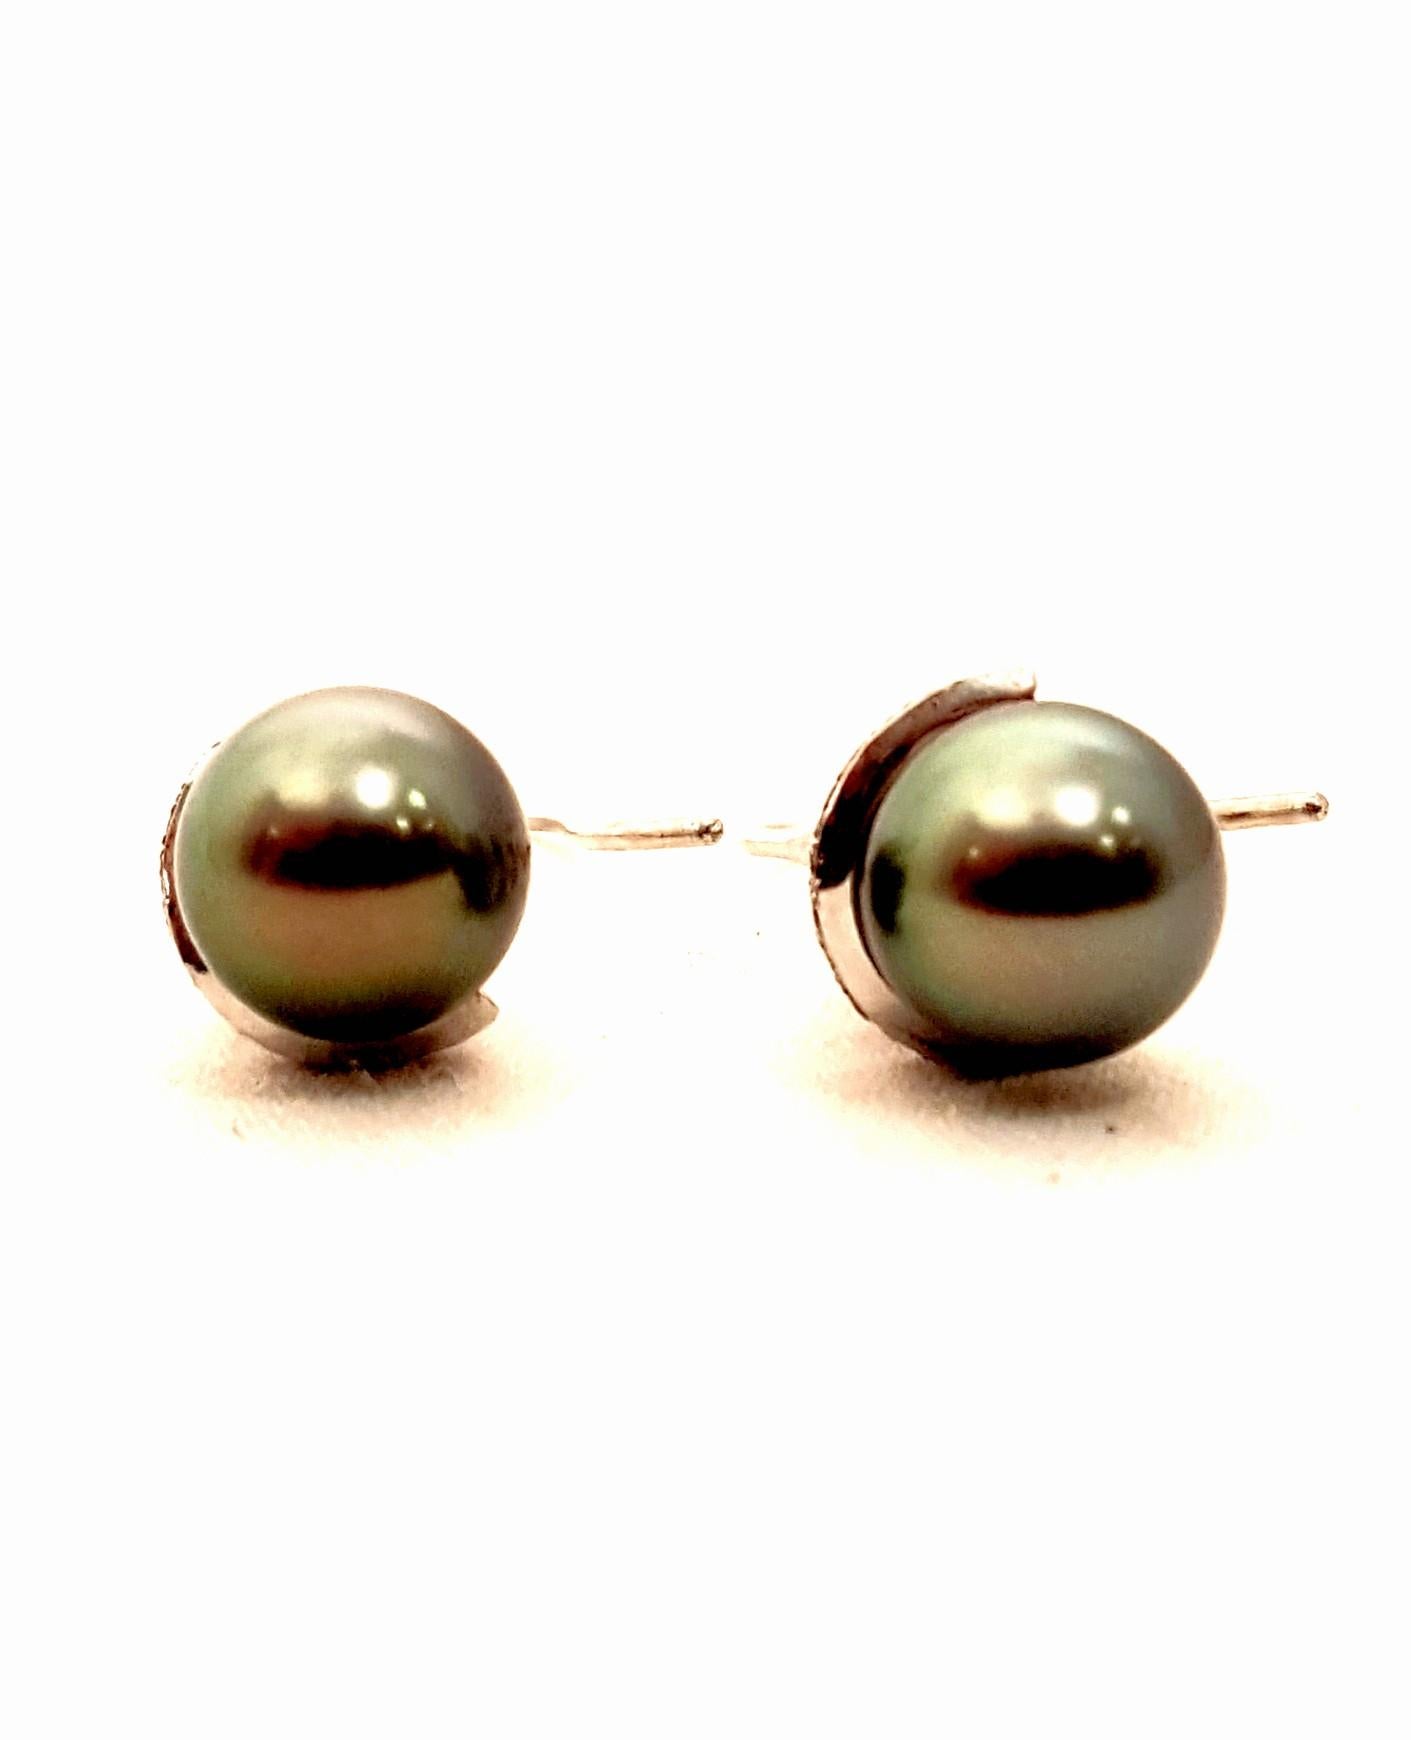 Contemporary 14 Karat Black Pearl and Swirled White Diamonds Pierced Earrings For Sale